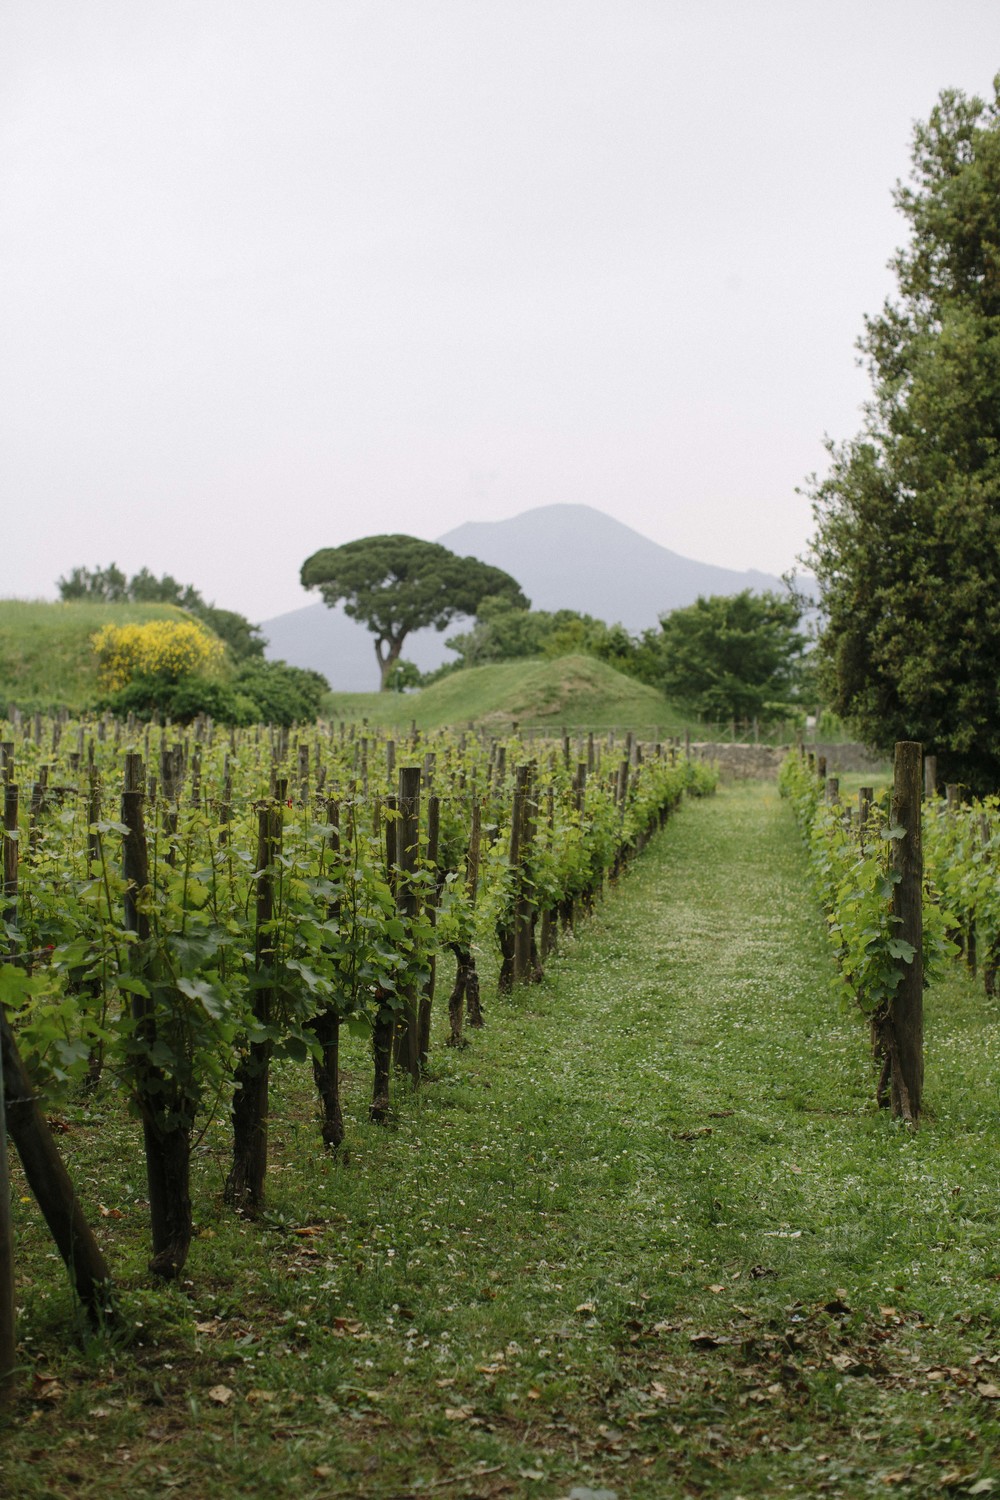 Pompeii has a functioning vineyard today in the same location where the ancient vineyard grew, with Mt. Vesuvius towering in the background.